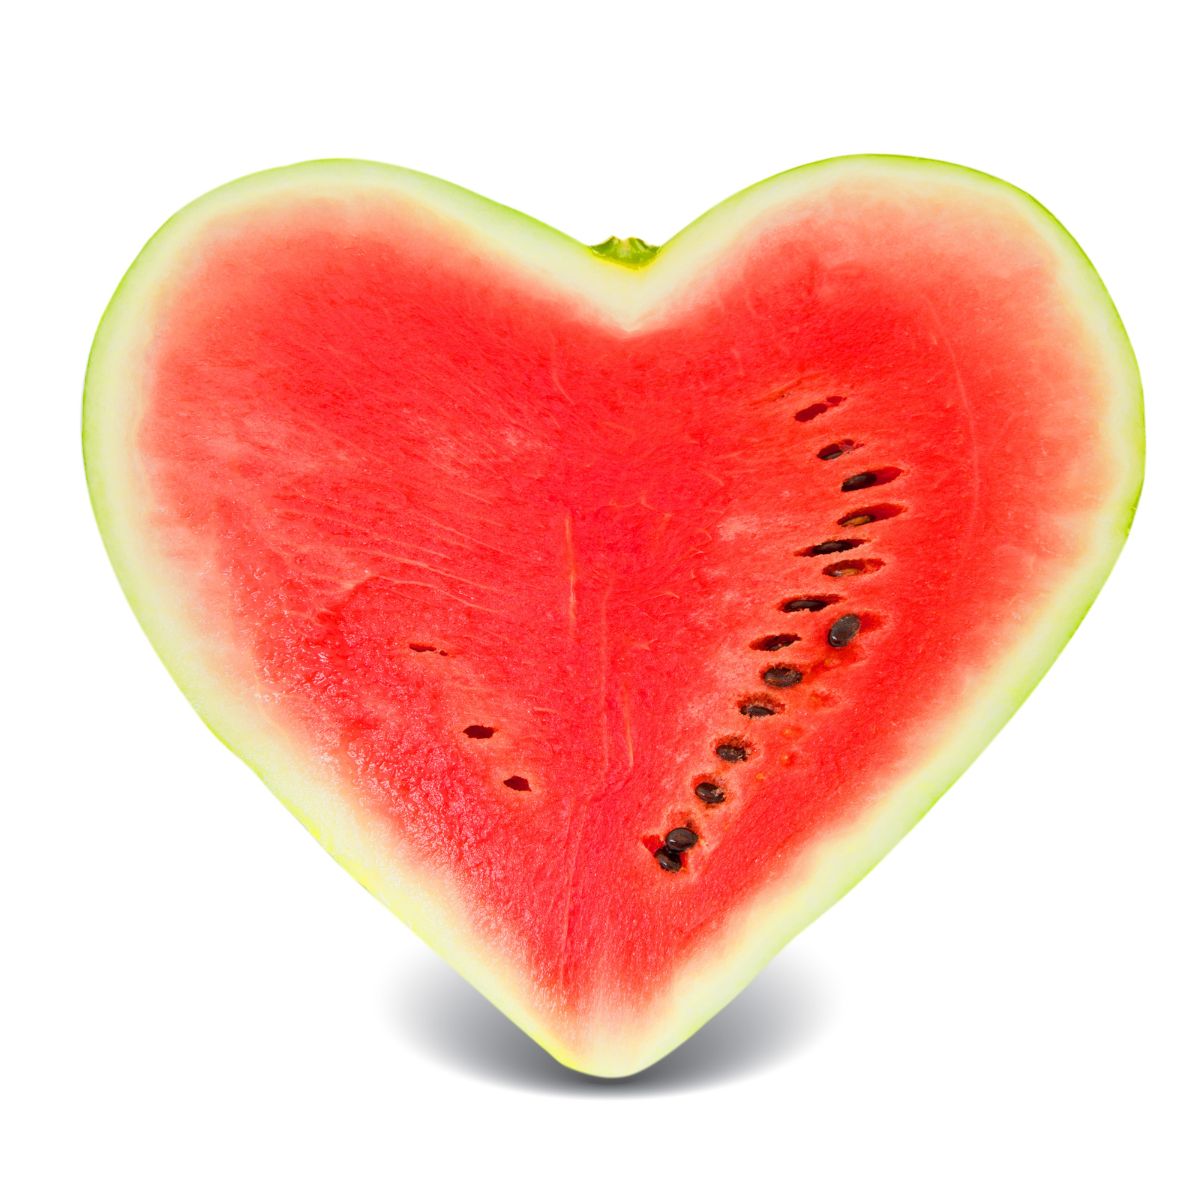 half of a heart shaped watermelon, on a white background.